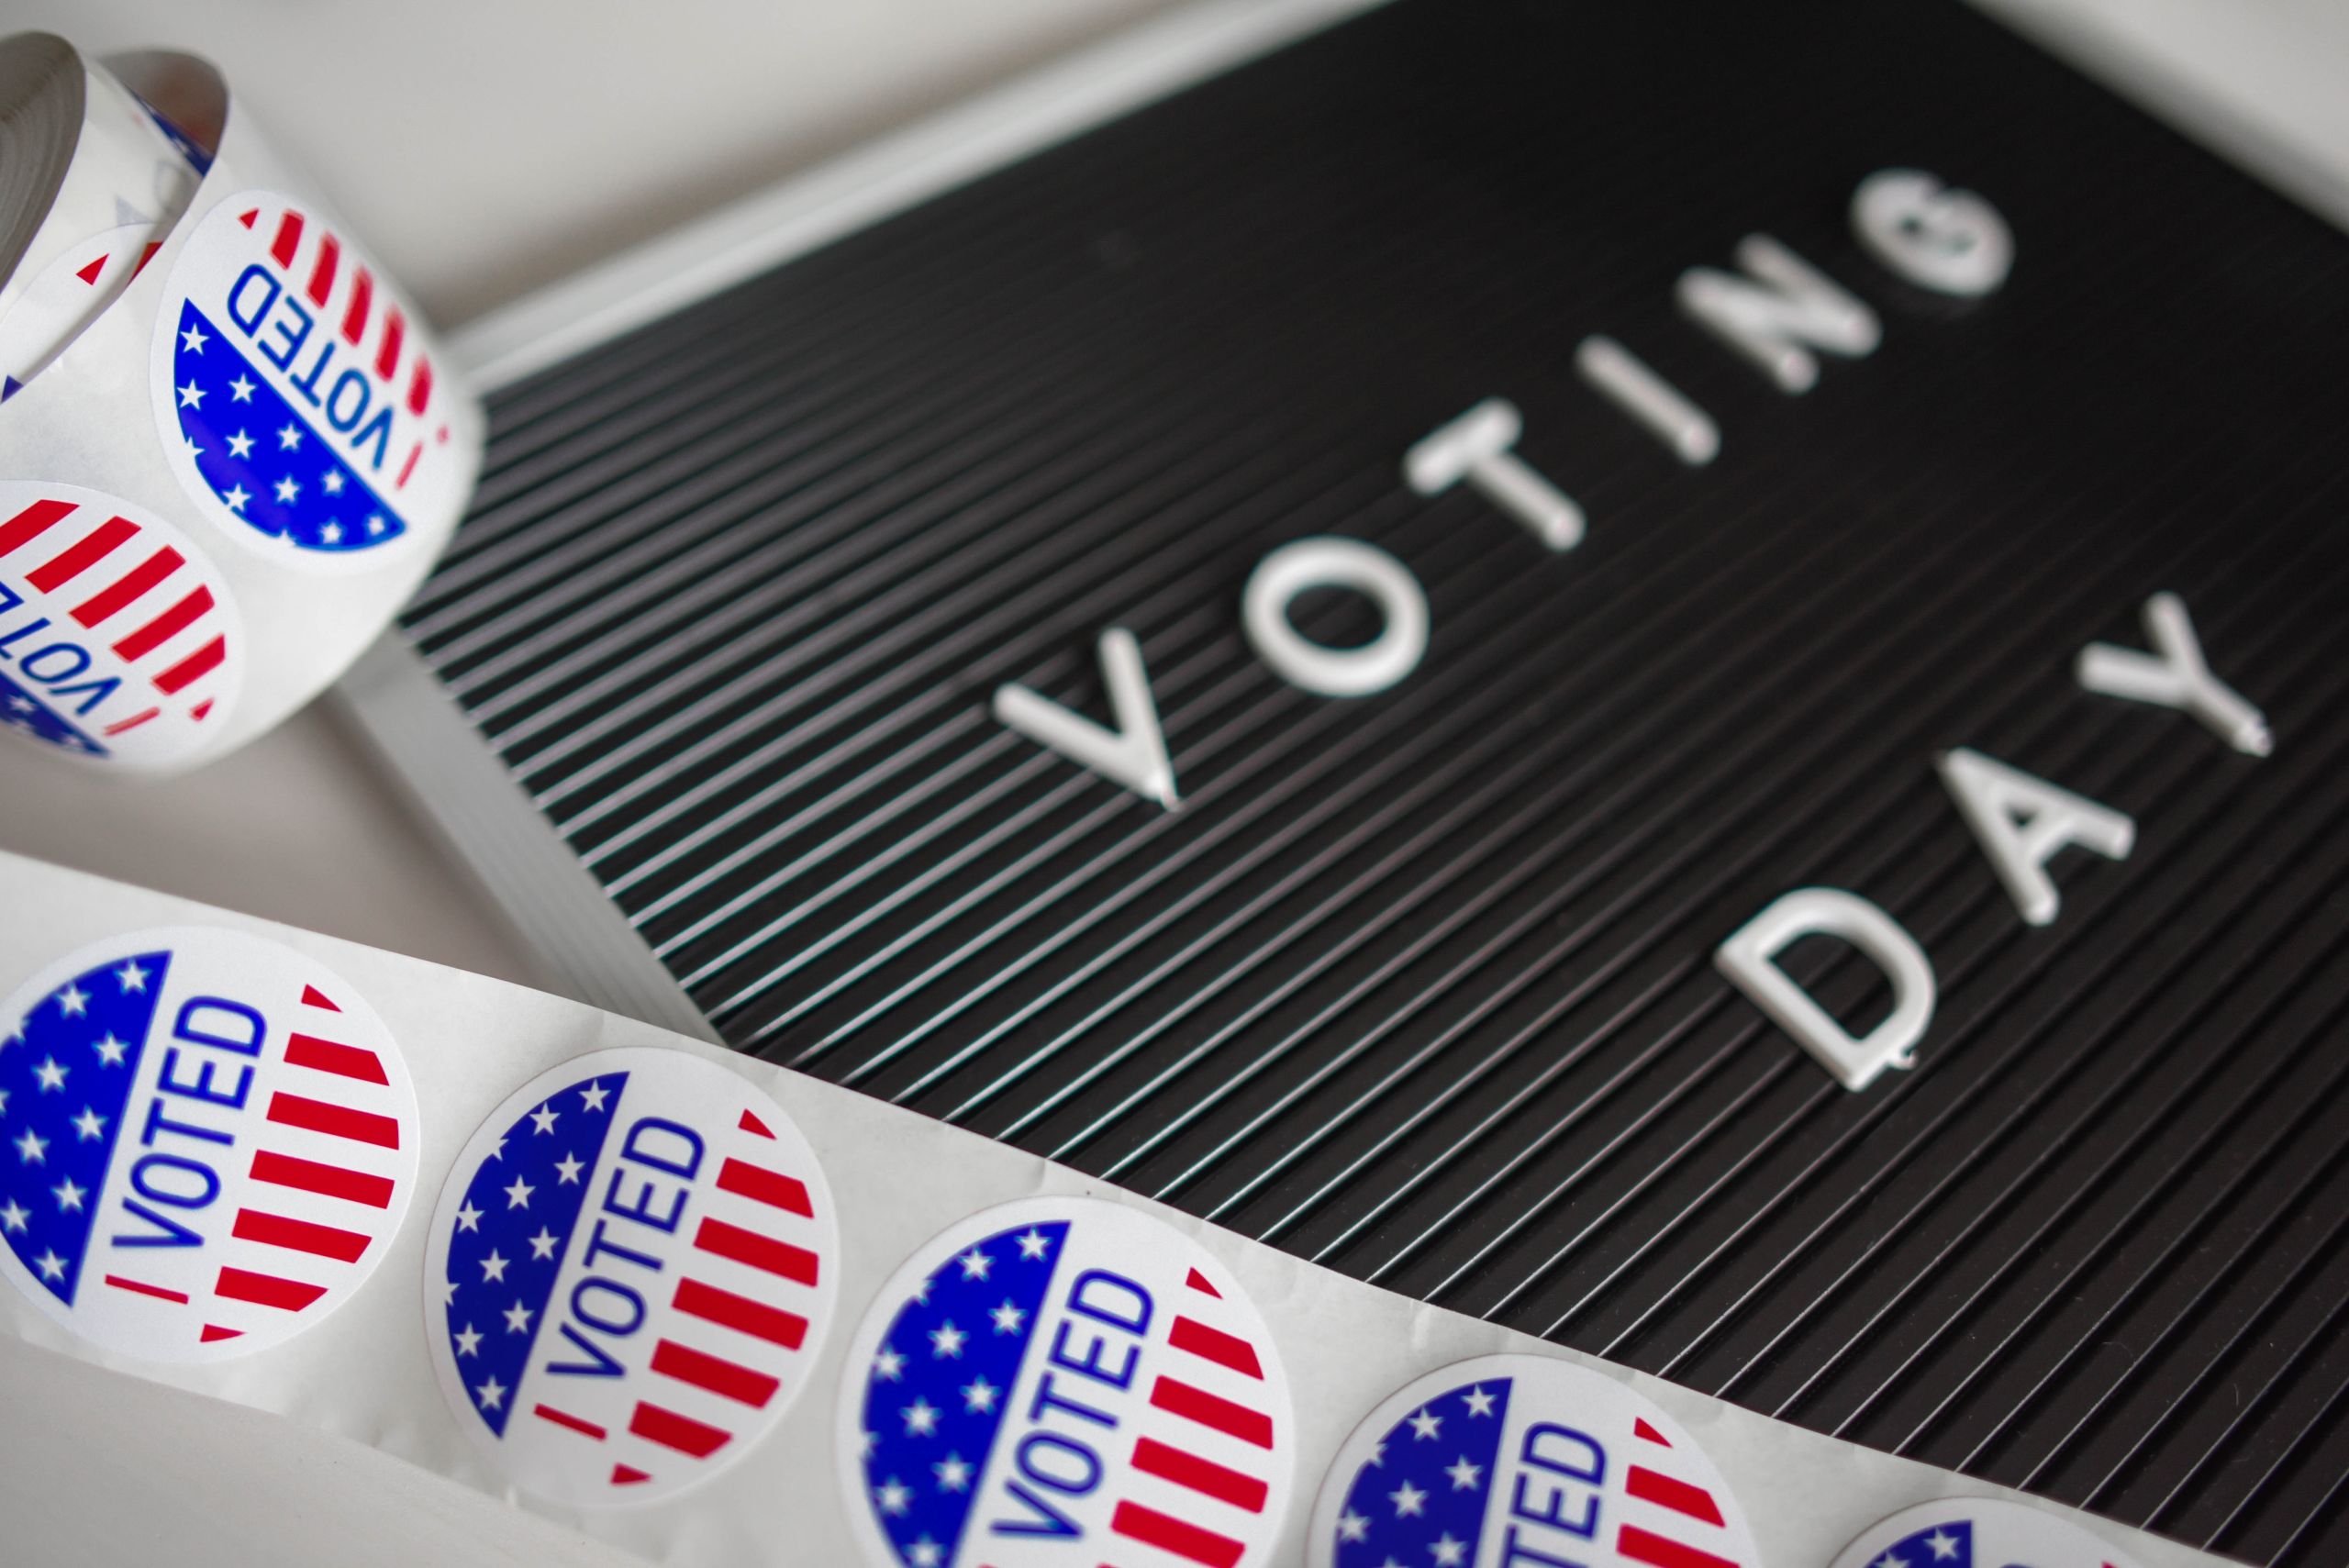 On Nov. 8, millions of Americans will be heading to the ballot boxes to cast their votes. Photo by Element5 Digital from Pexels.